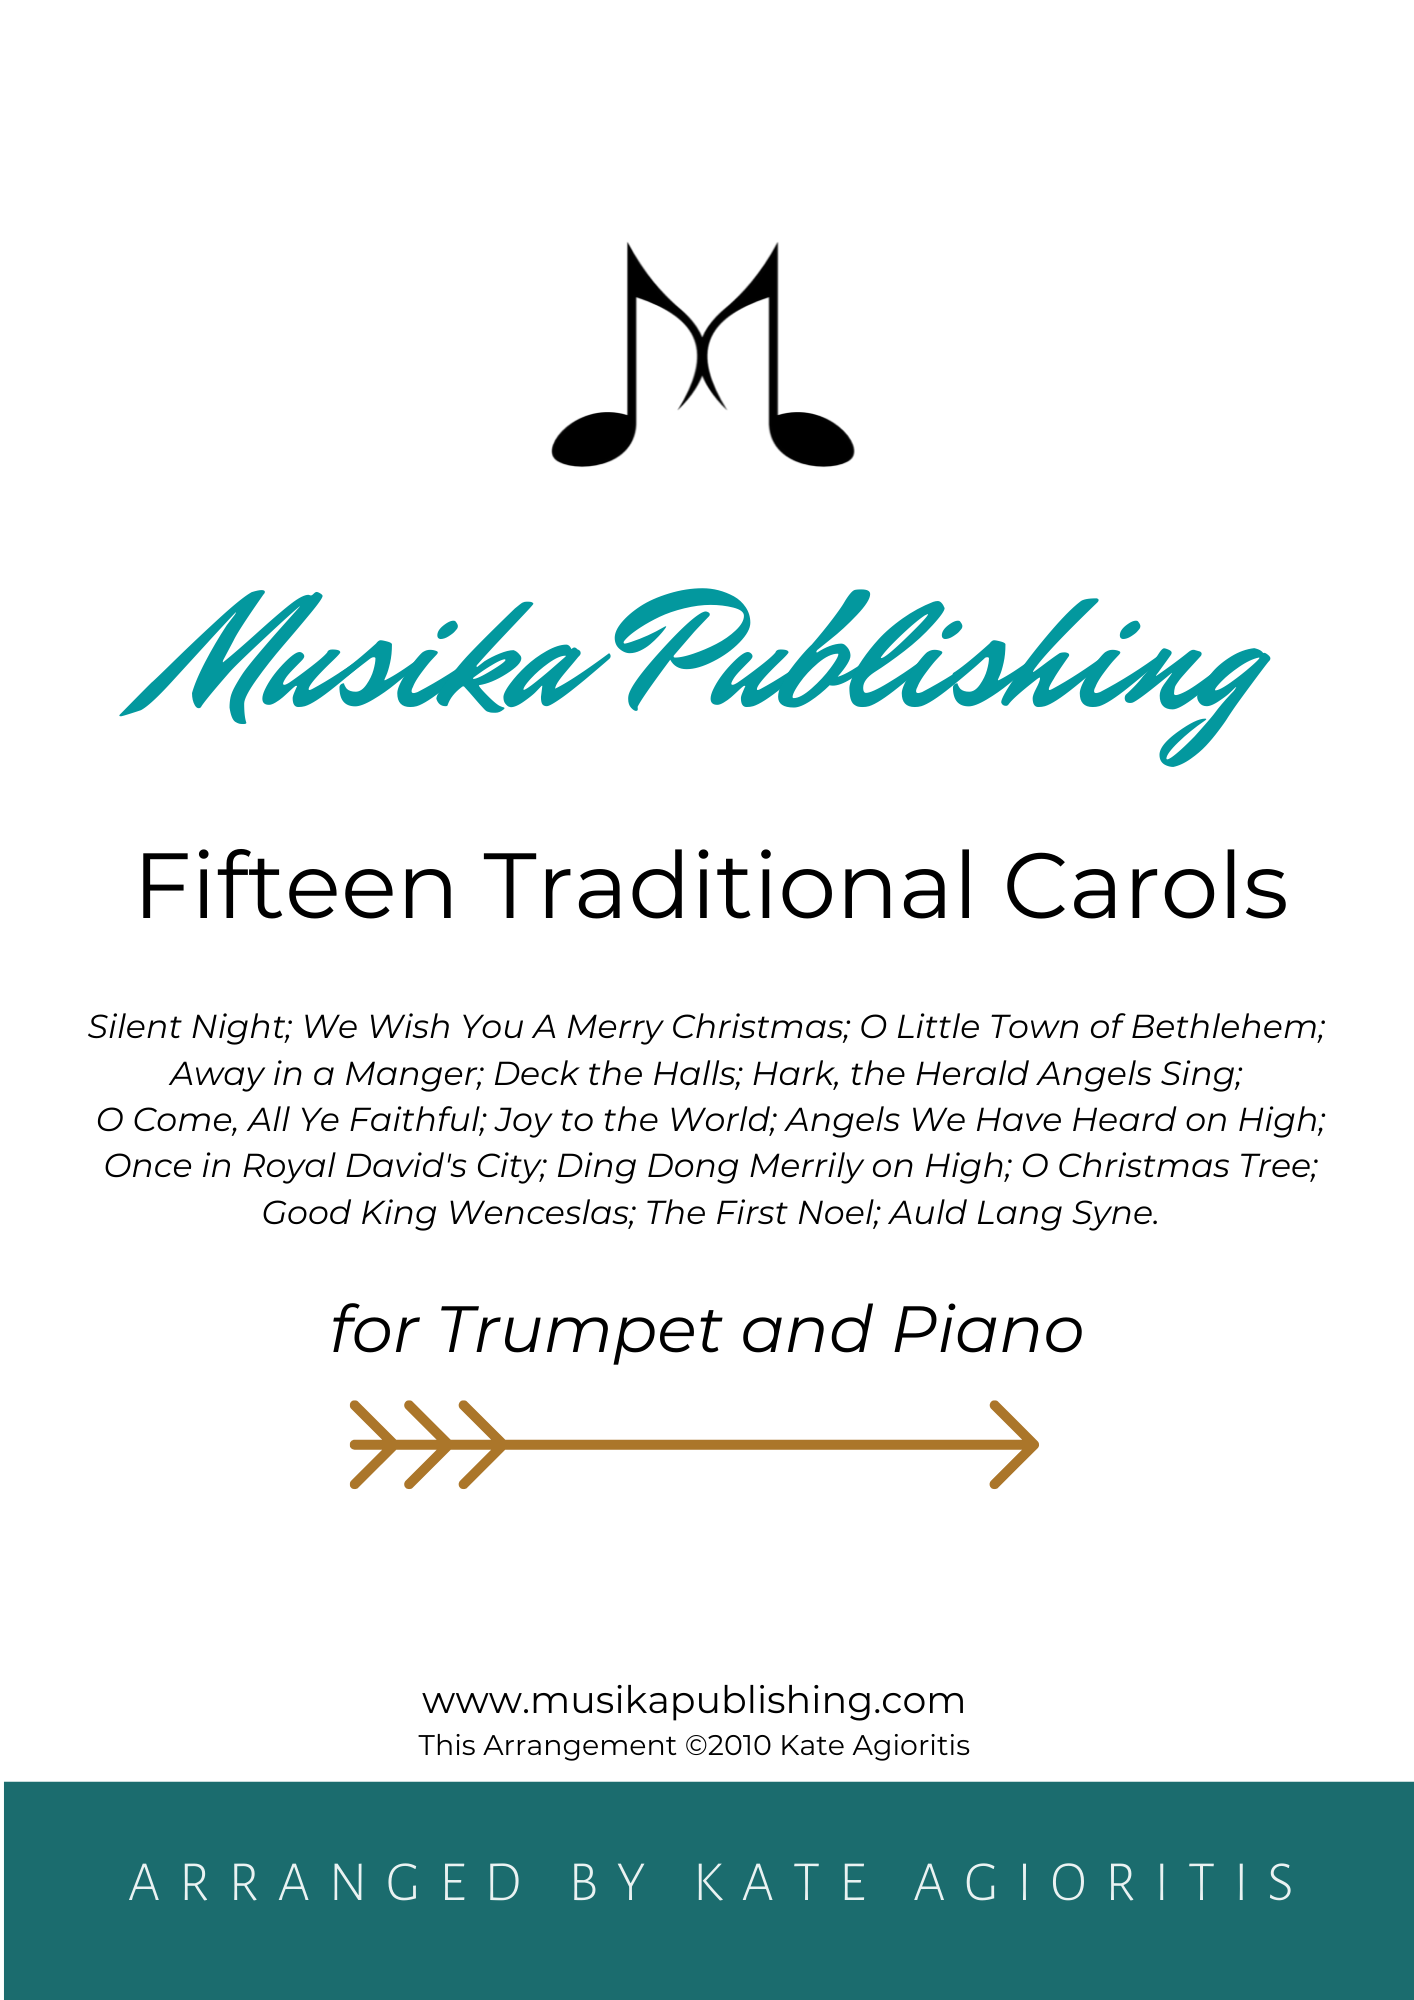 Fifteen Traditional Carols - for Trumpet and Piano